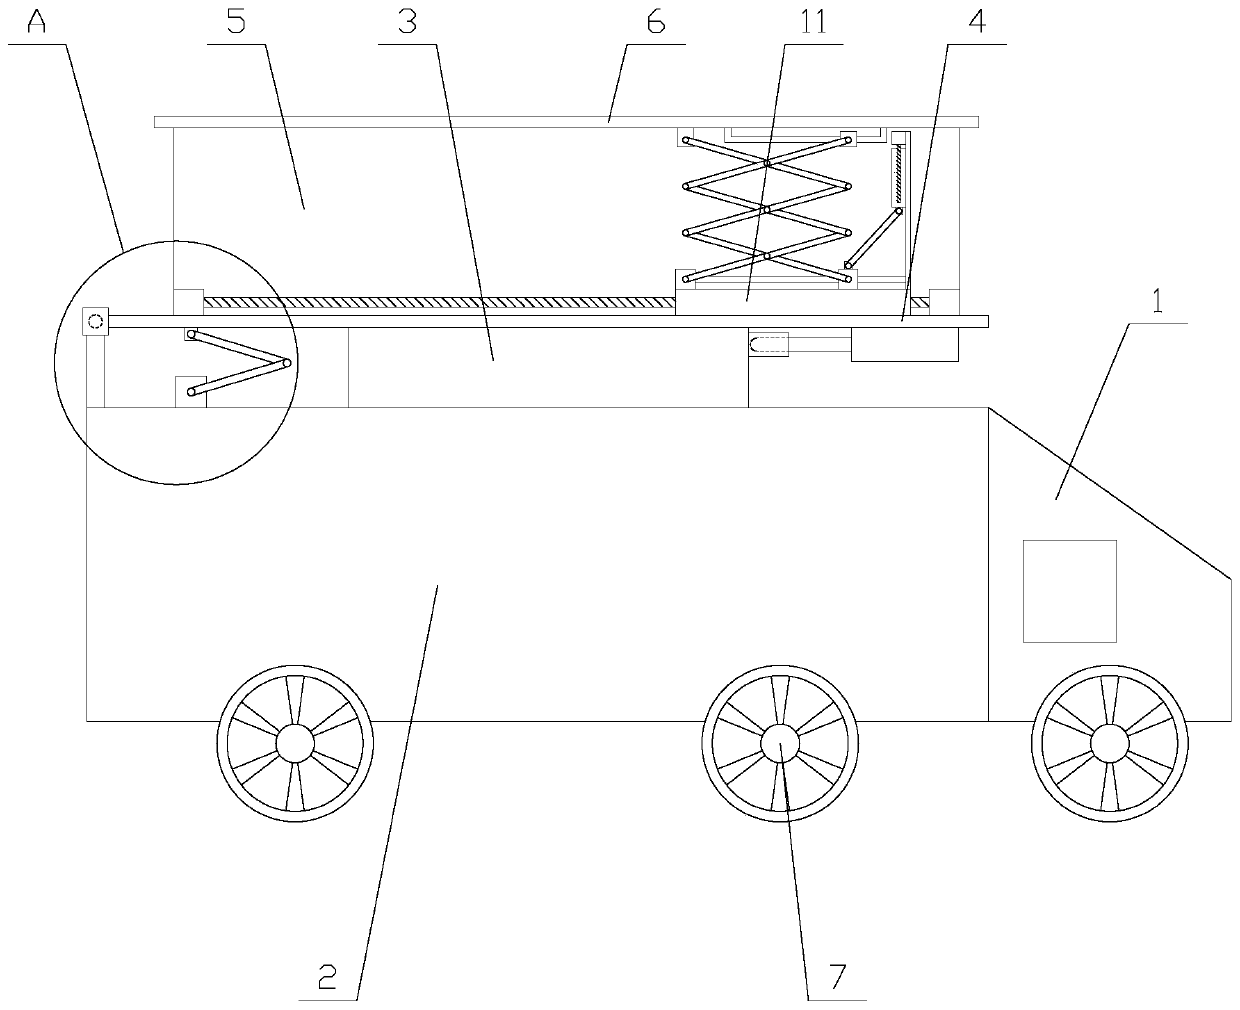 Solar car flexible in structure and facilitating luggage placing